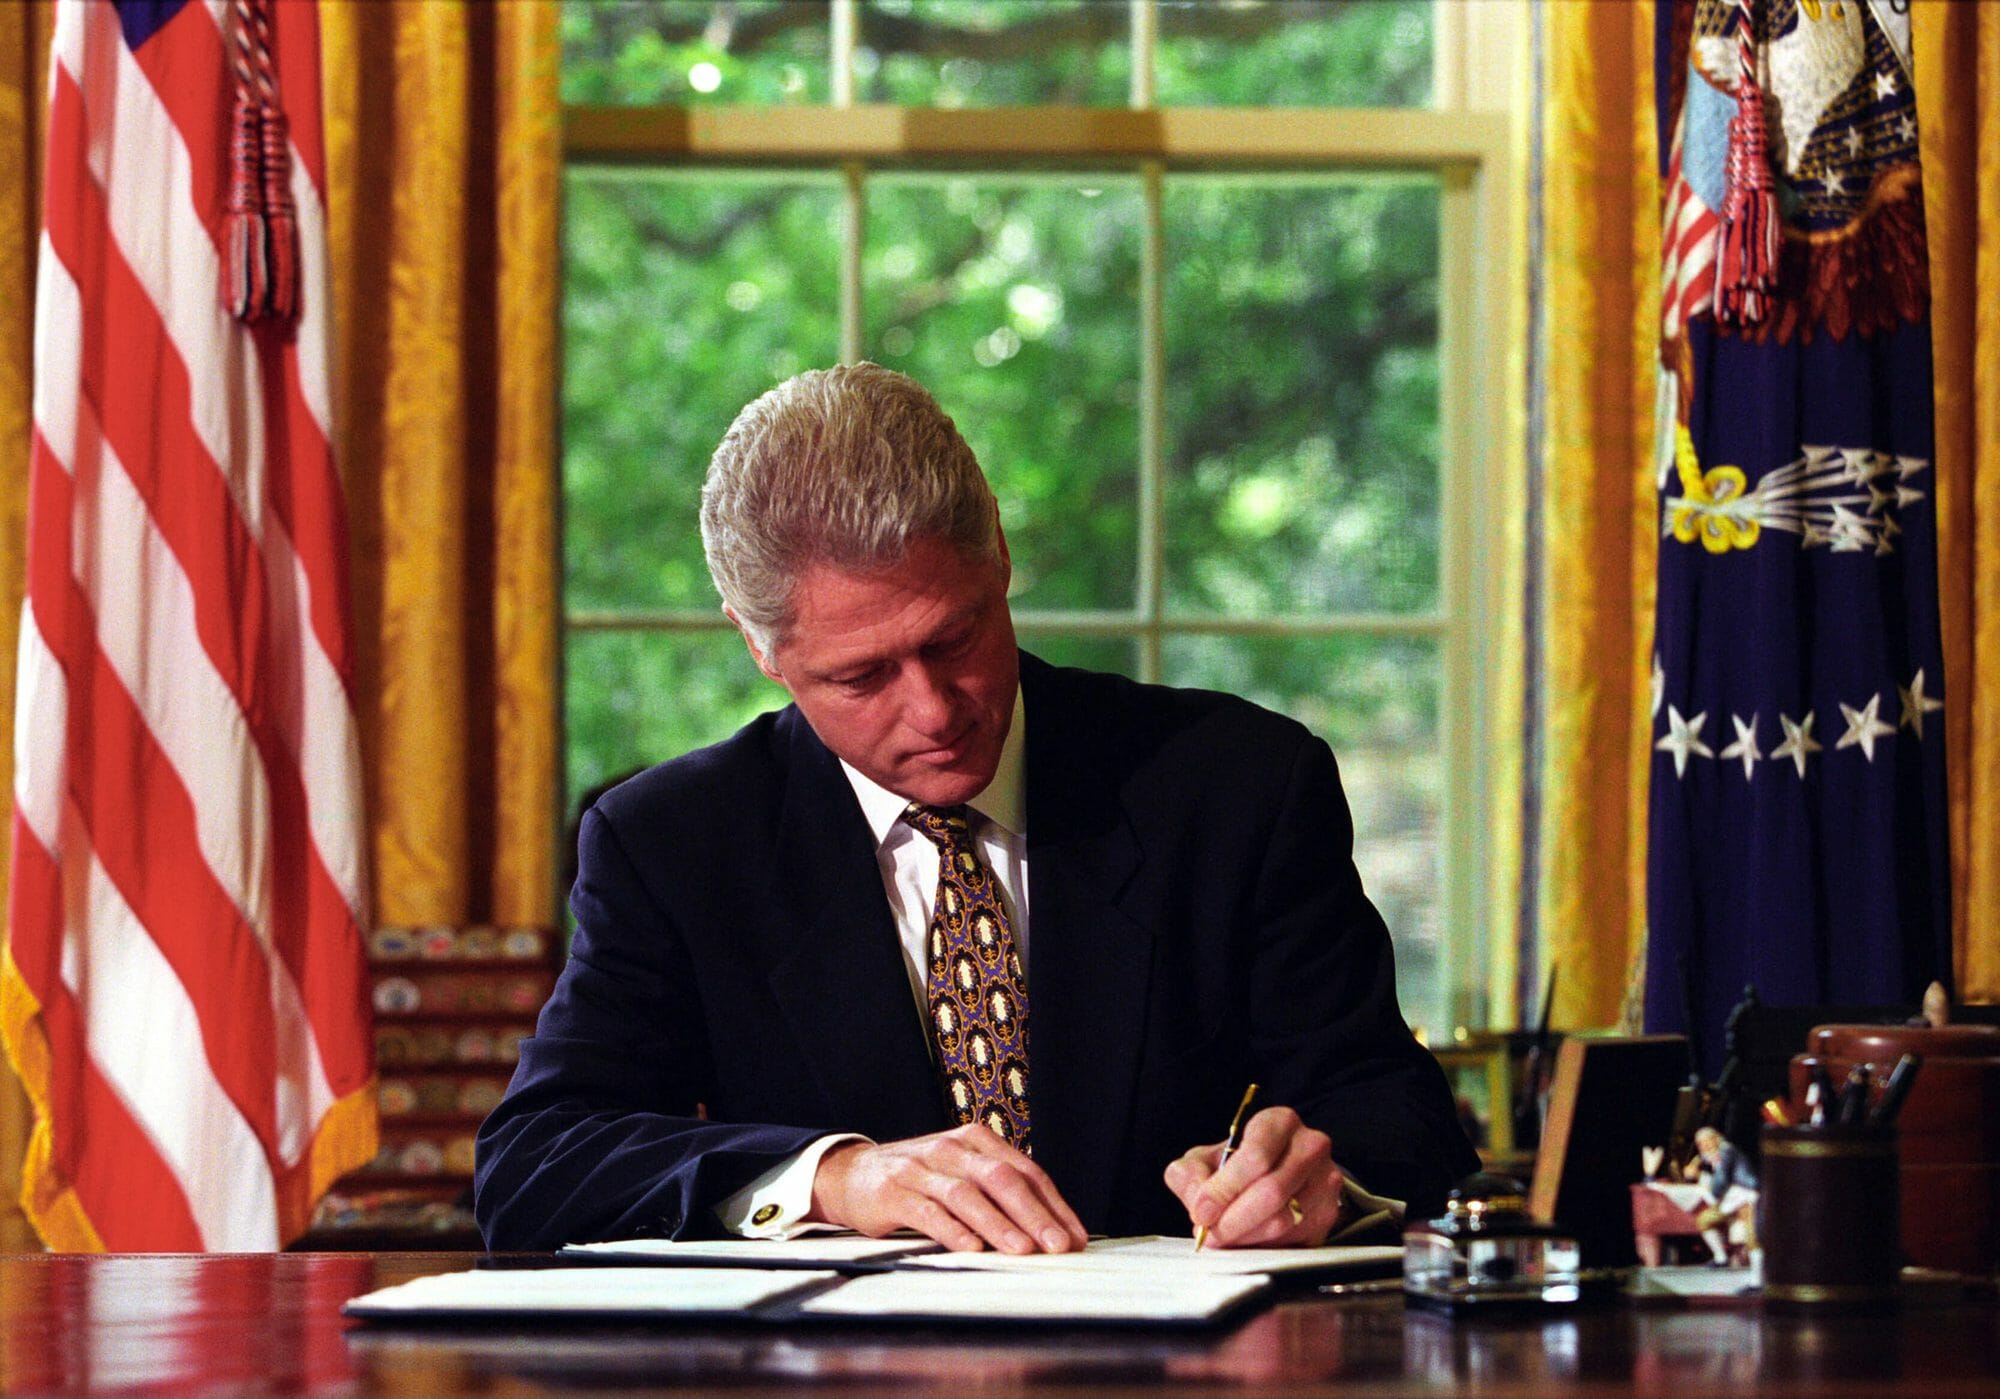 Ralph Alswang, “President William J. Clinton Signing Line Item Veto Letters,” Photograph, August 11, 1997. National Archives, Photographs of the White House Photograph Office, https://catalog.archives.gov/id/77861673.